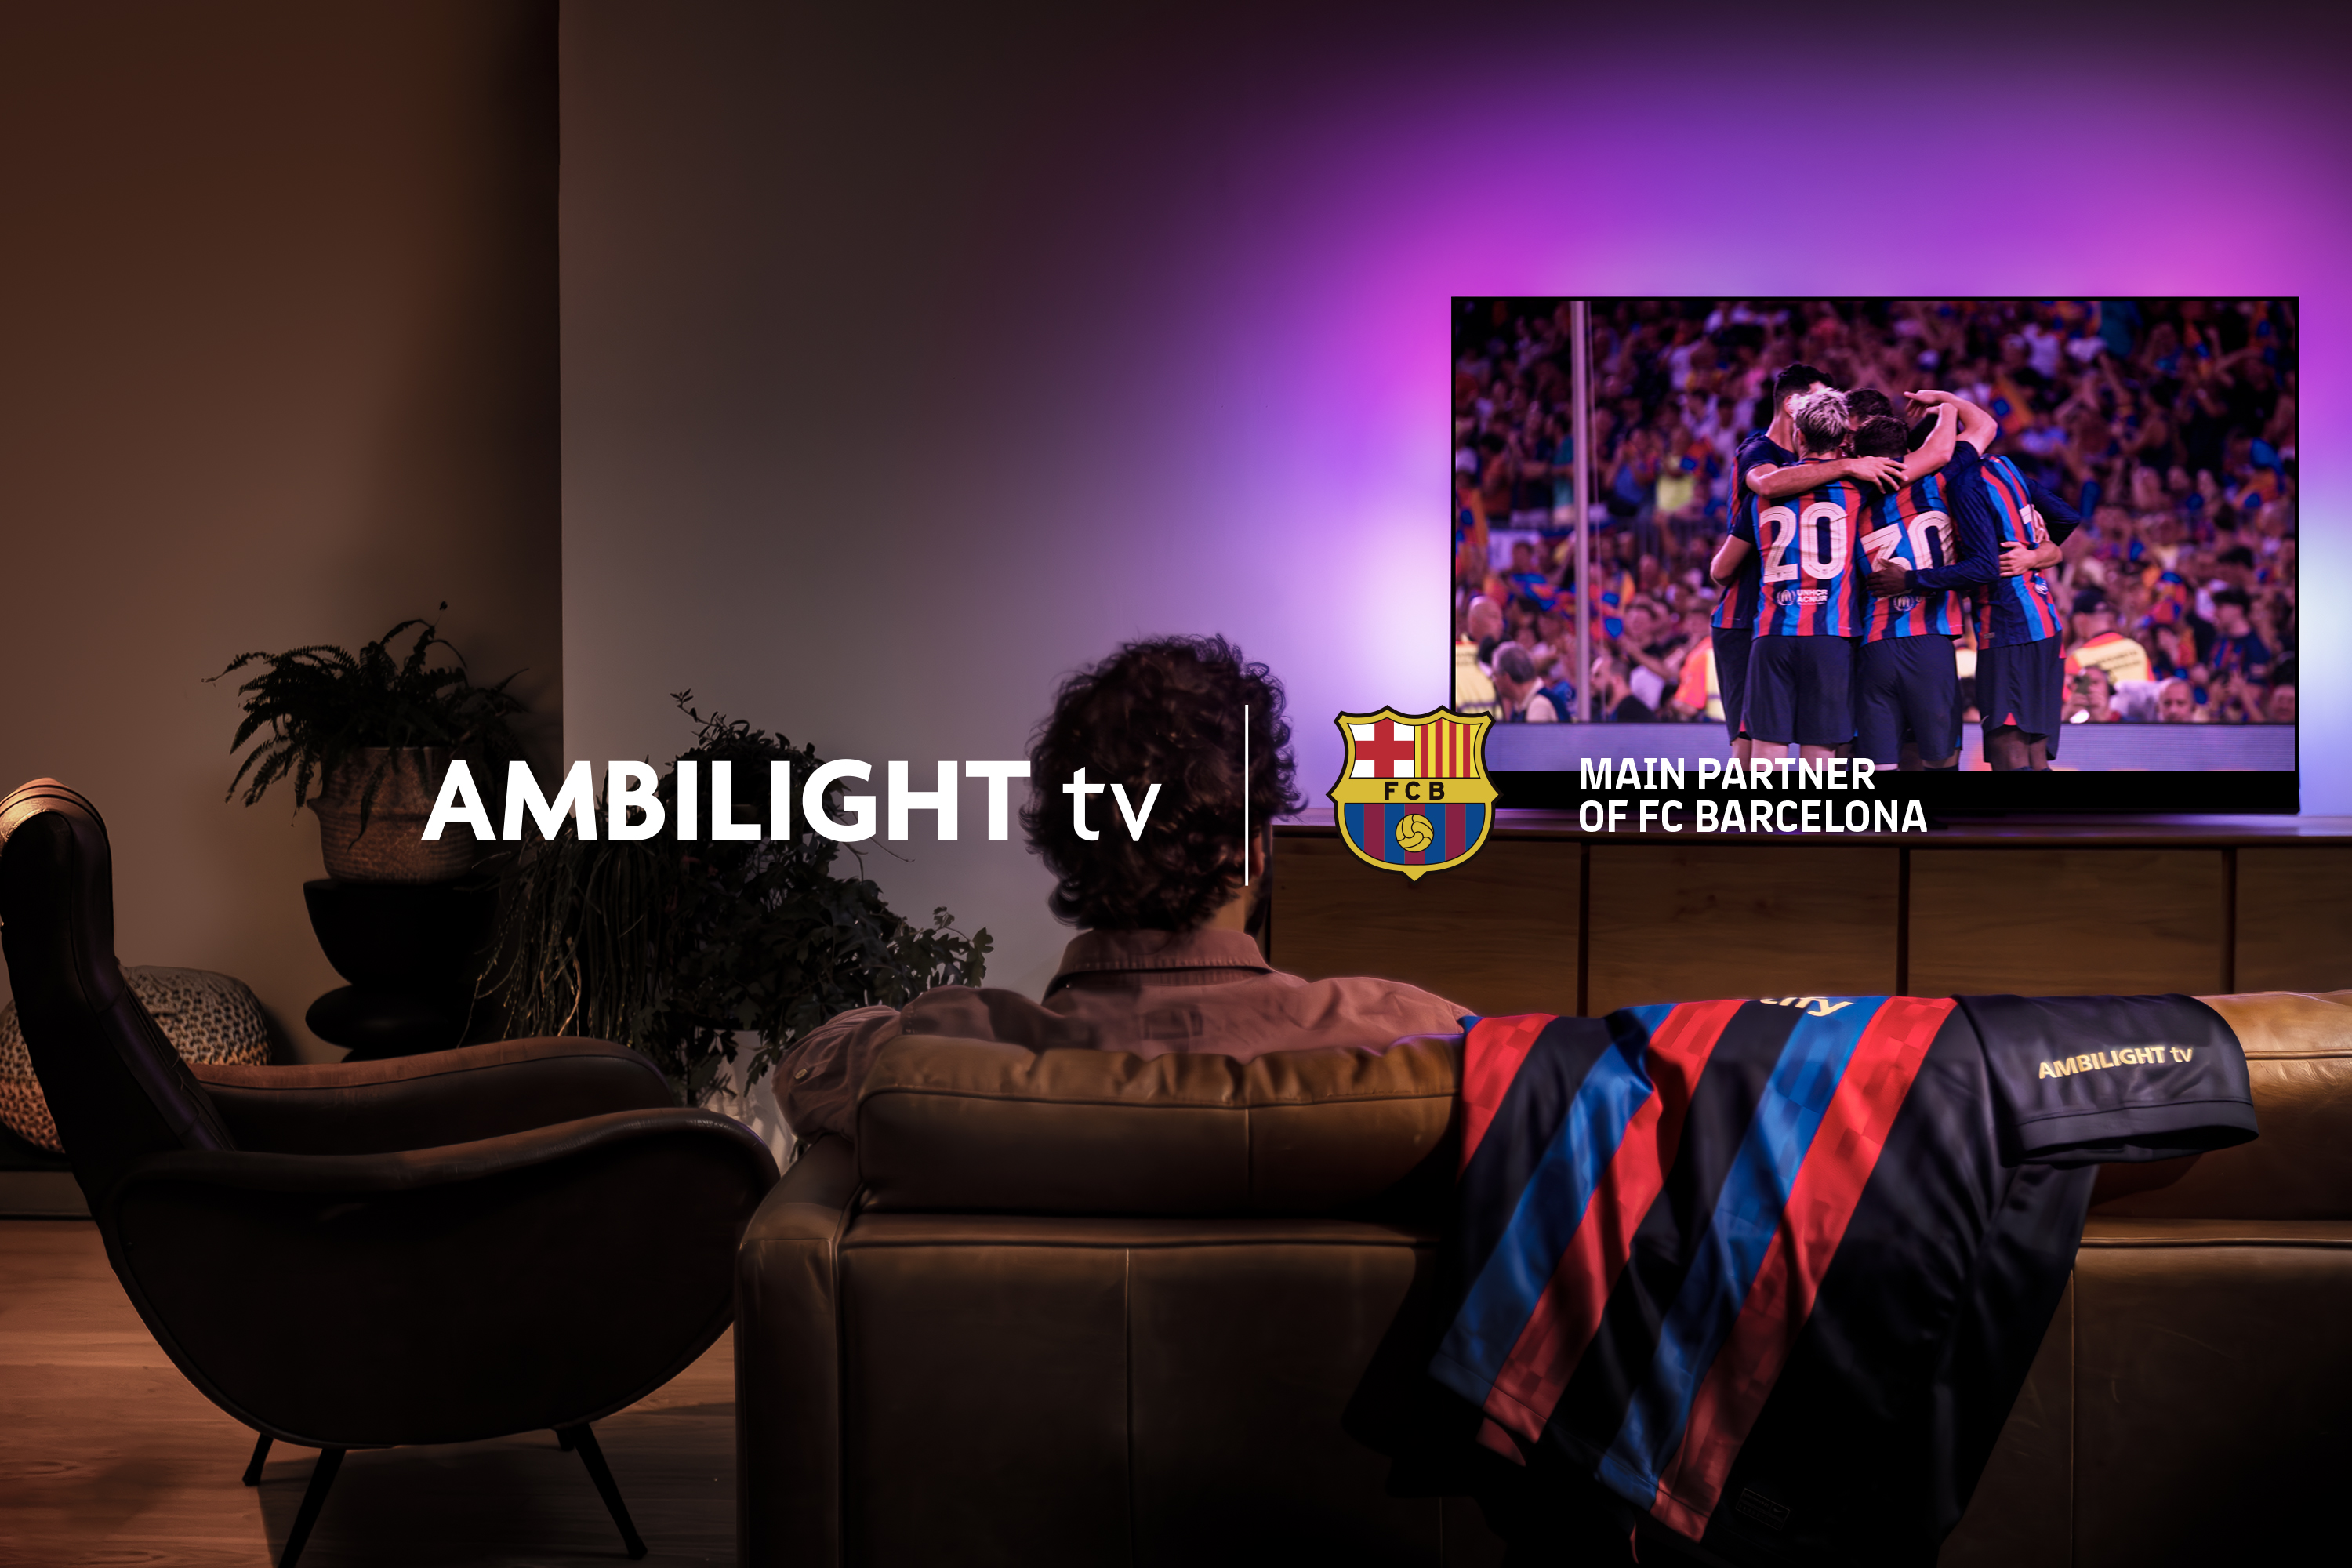 FC Barcelona sign partnership with TP Vision to put Ambilight TV's